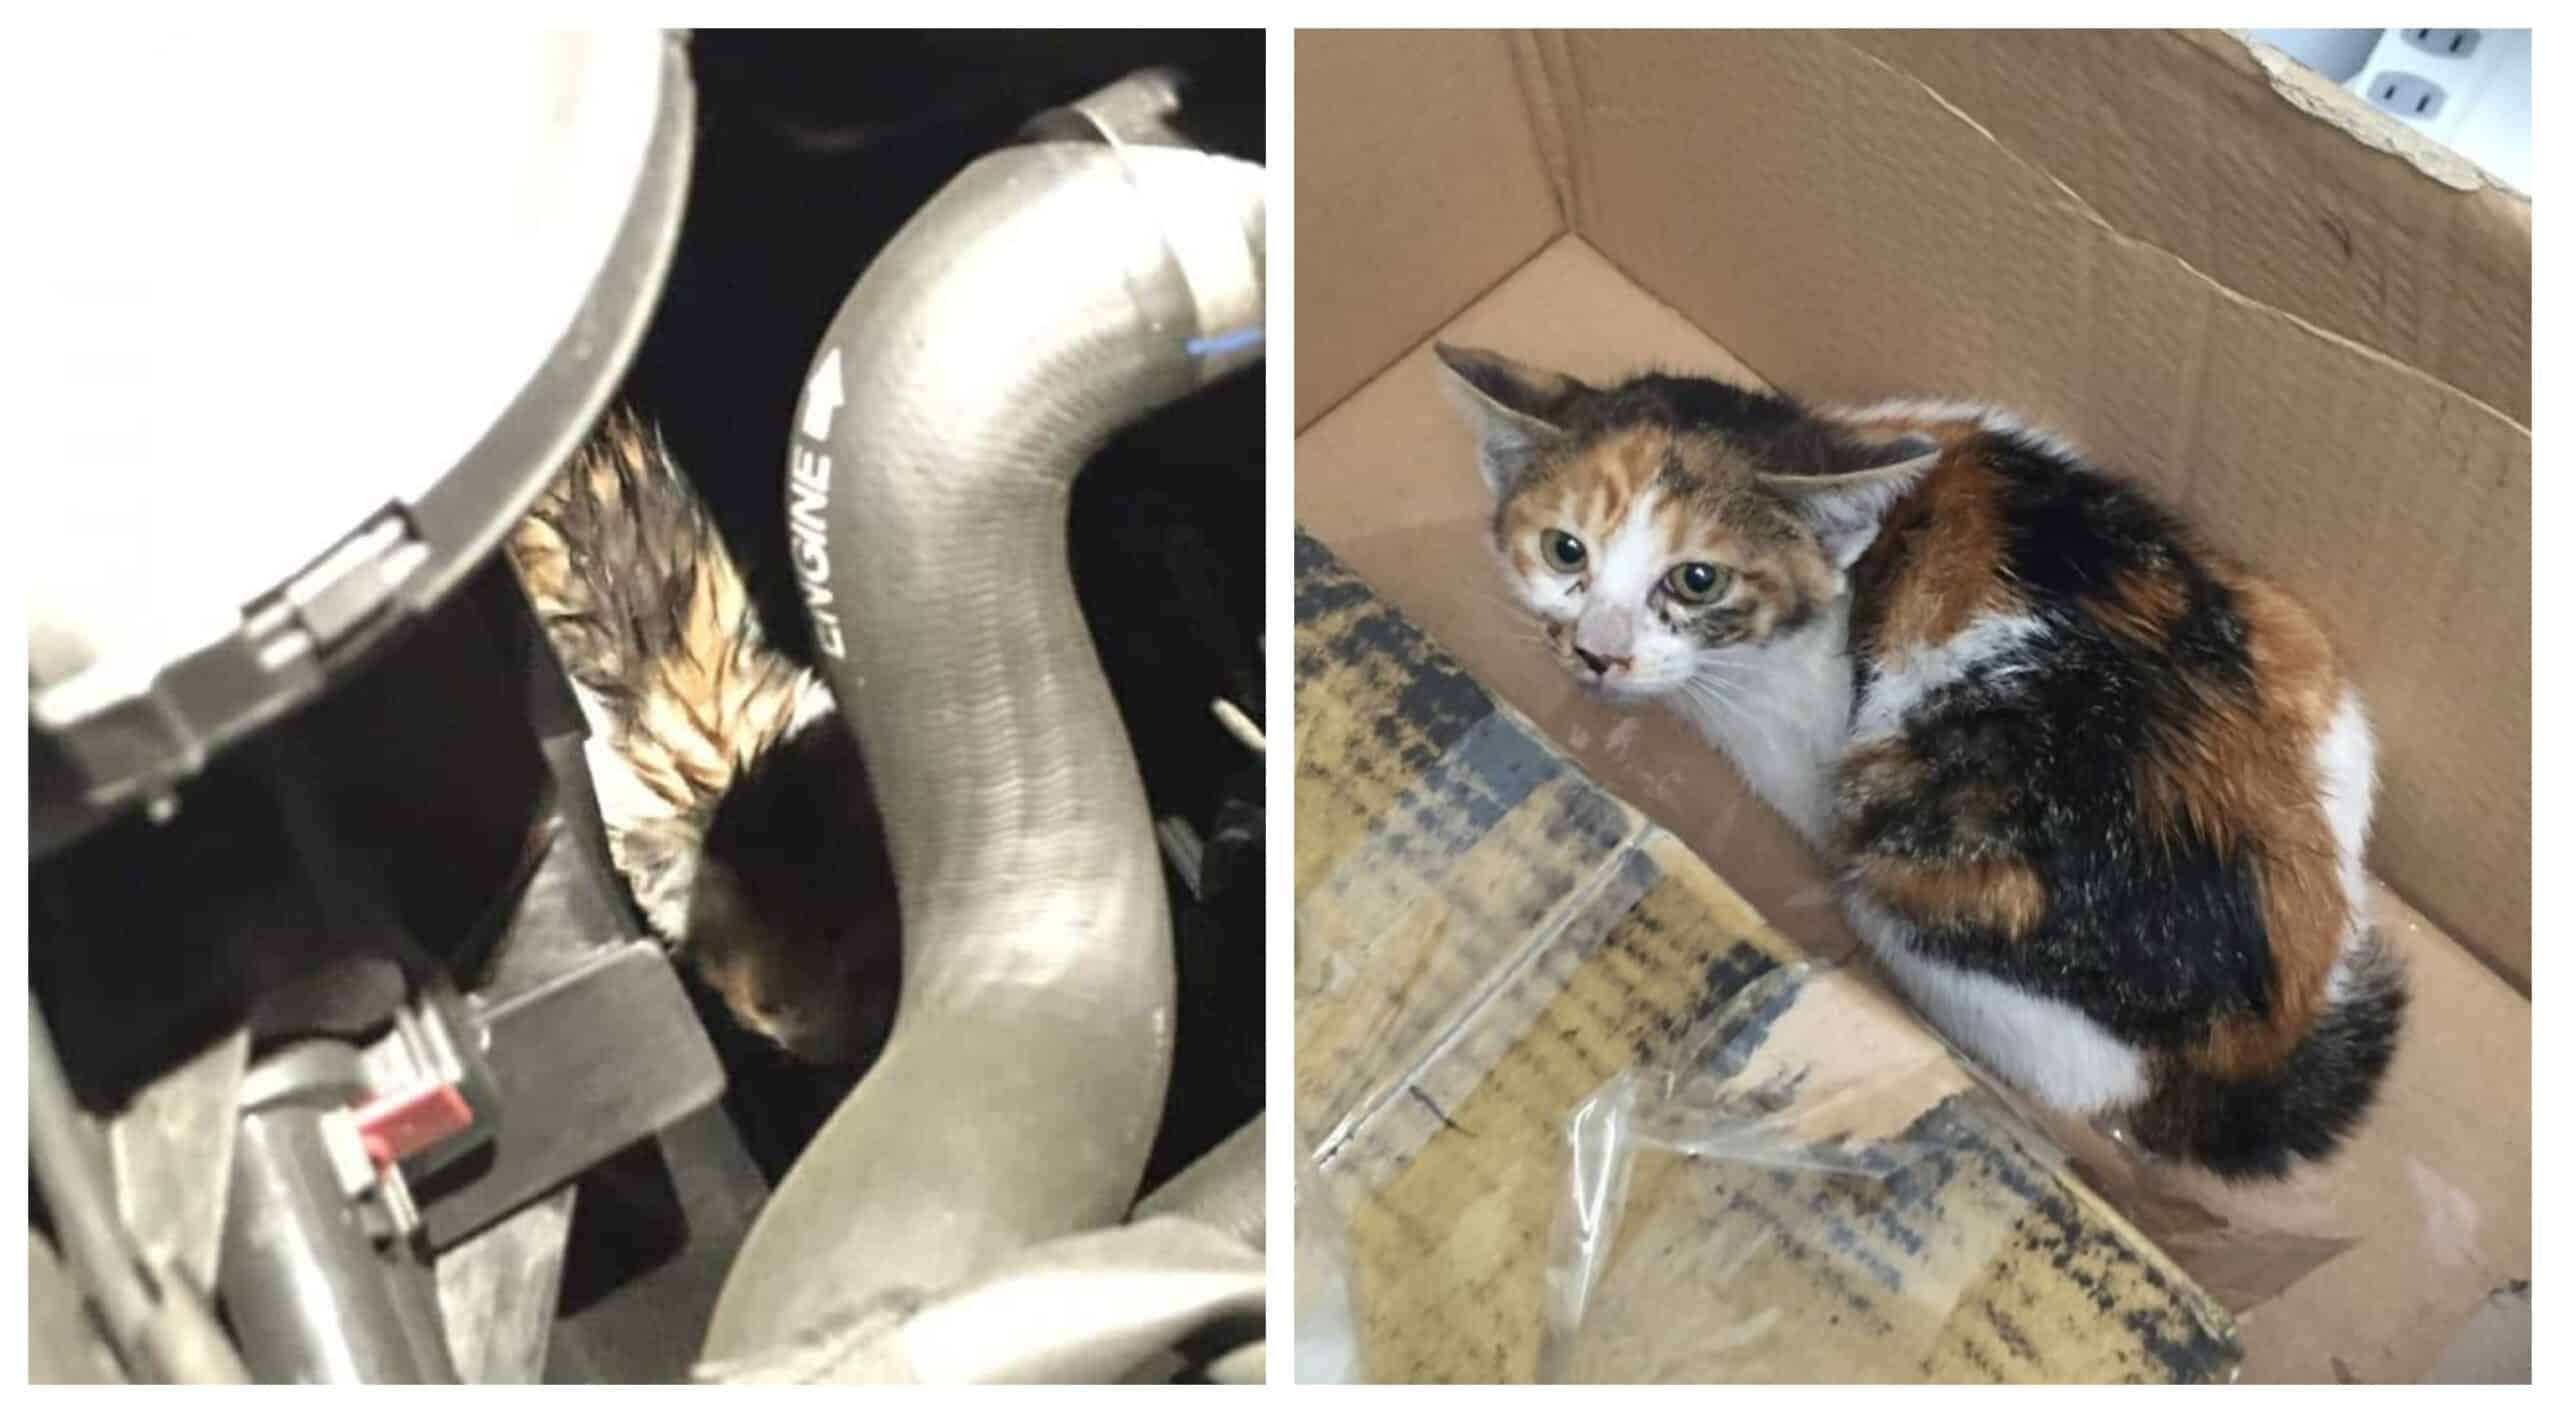 A man risks his own life and gives up his car to save a special cat